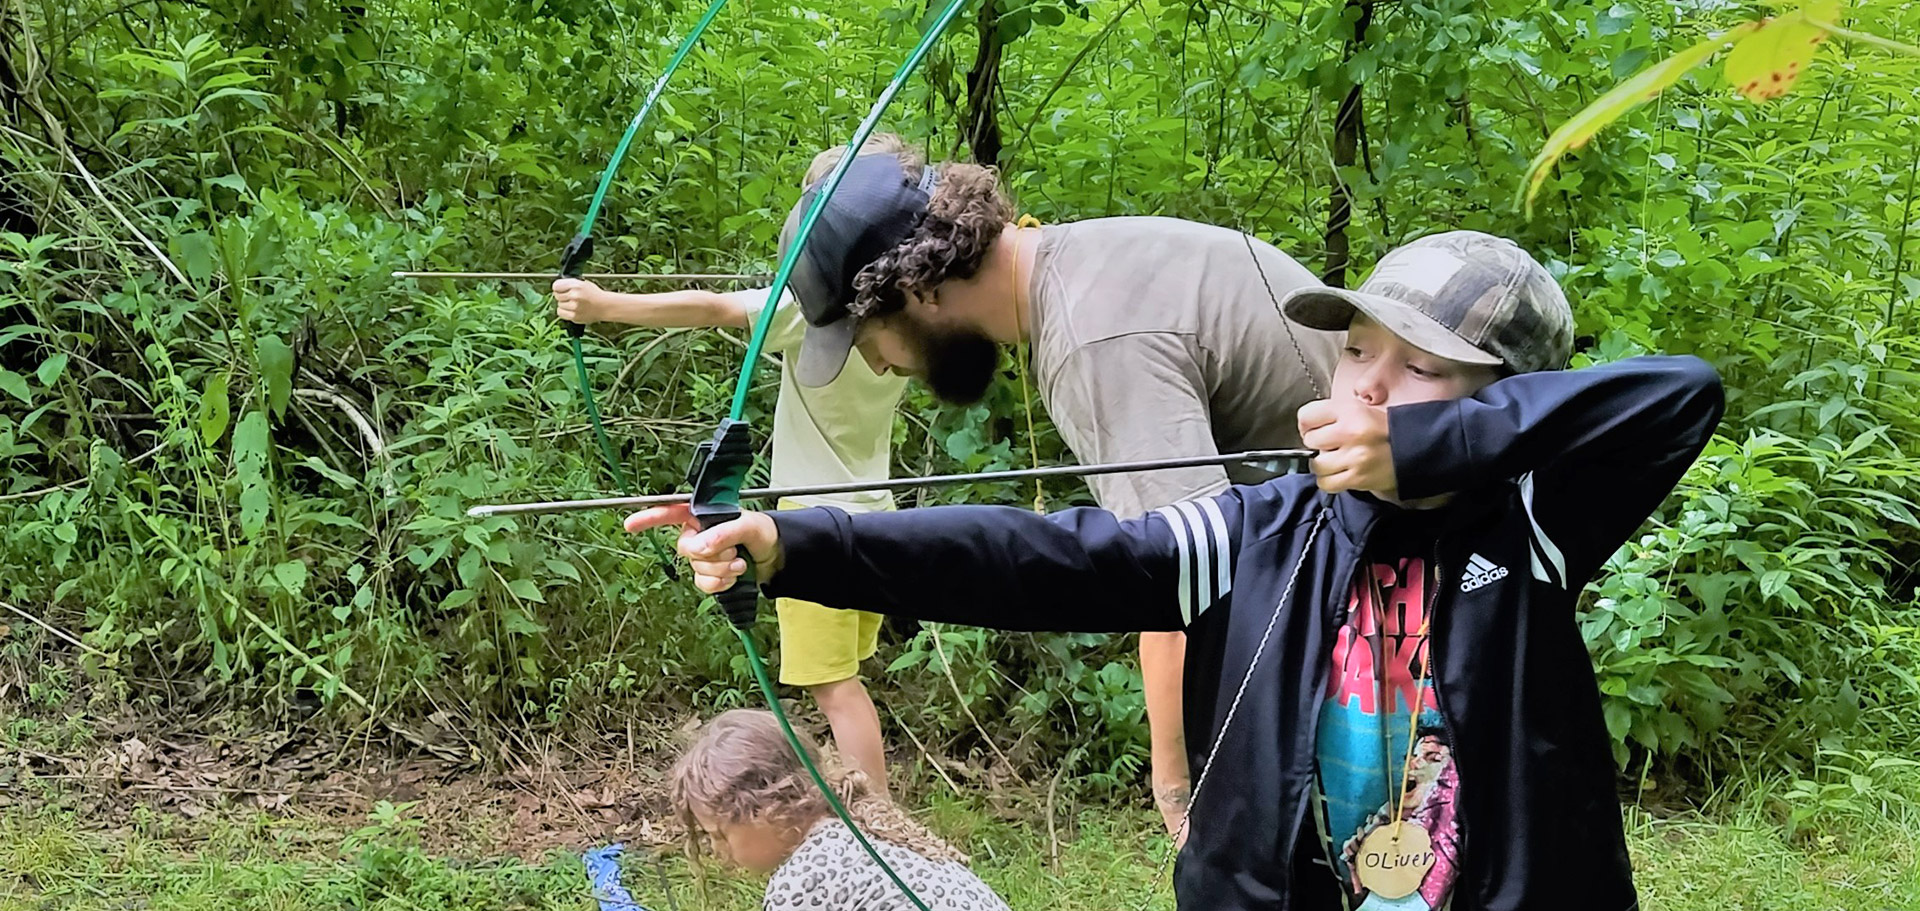 Archery instruction by nature-connection mentor at Forest Floor's Asheville summer camp series